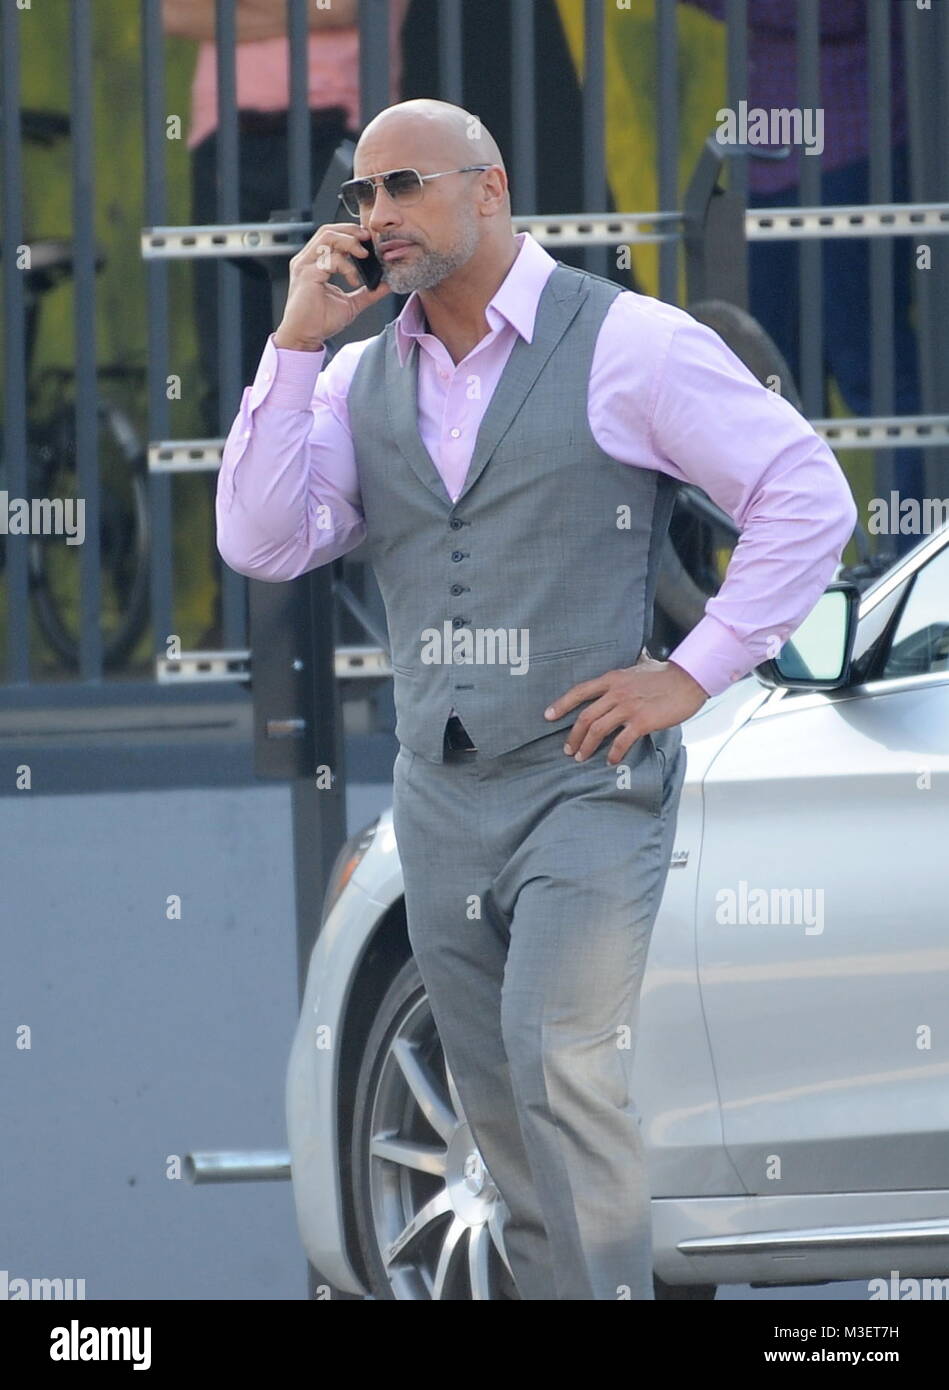 Actor Dwayne Johnson strikes a pose while filming a scene for the hit HBO  series "Ballers" filmin gin downtown Los Angeles. Featuring: Dwayne Johnson  Where: Los Angeles, California, United States When: 10